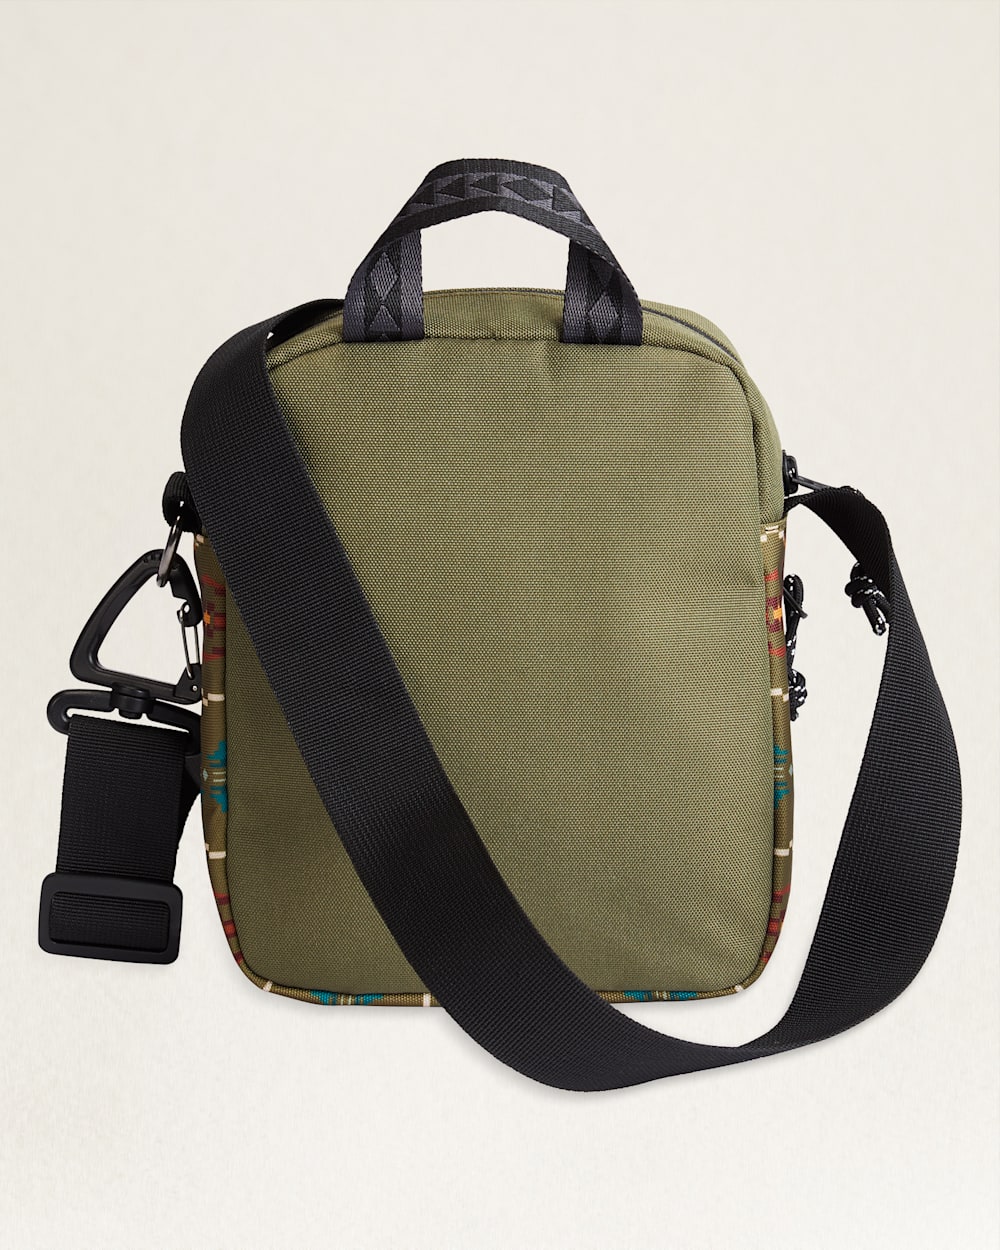 ALTERNATE VIEW OF CARICO LAKE CROSSBODY BAG IN OLIVE image number 2